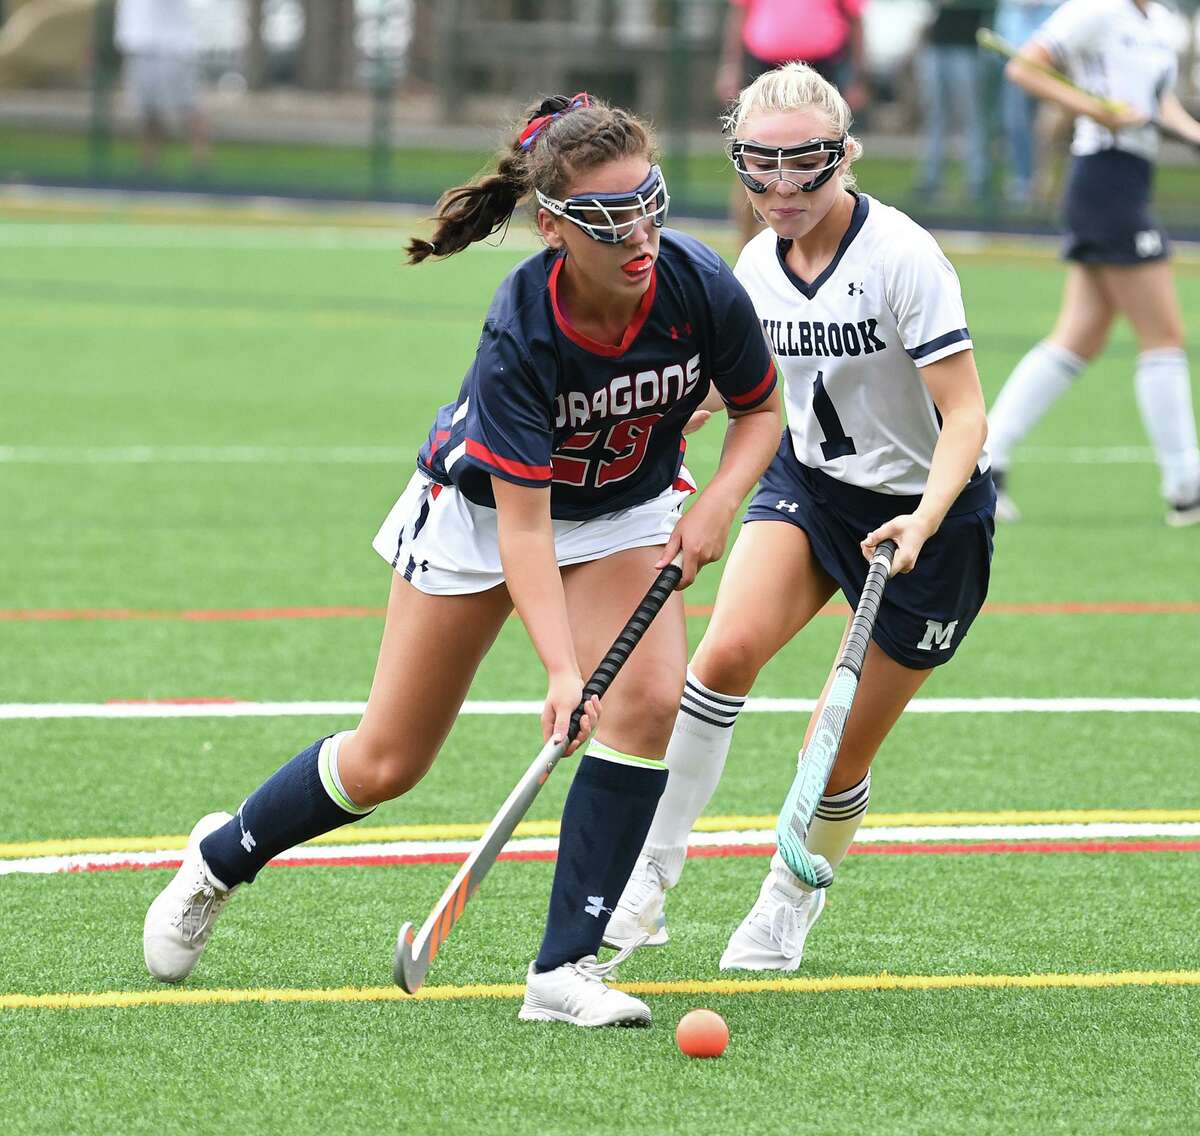 Junior Zoe Koskinas (Fairfield) scored five goals to lead Greens Farms Academy to an 11-0 win over Millbrook Saturday.